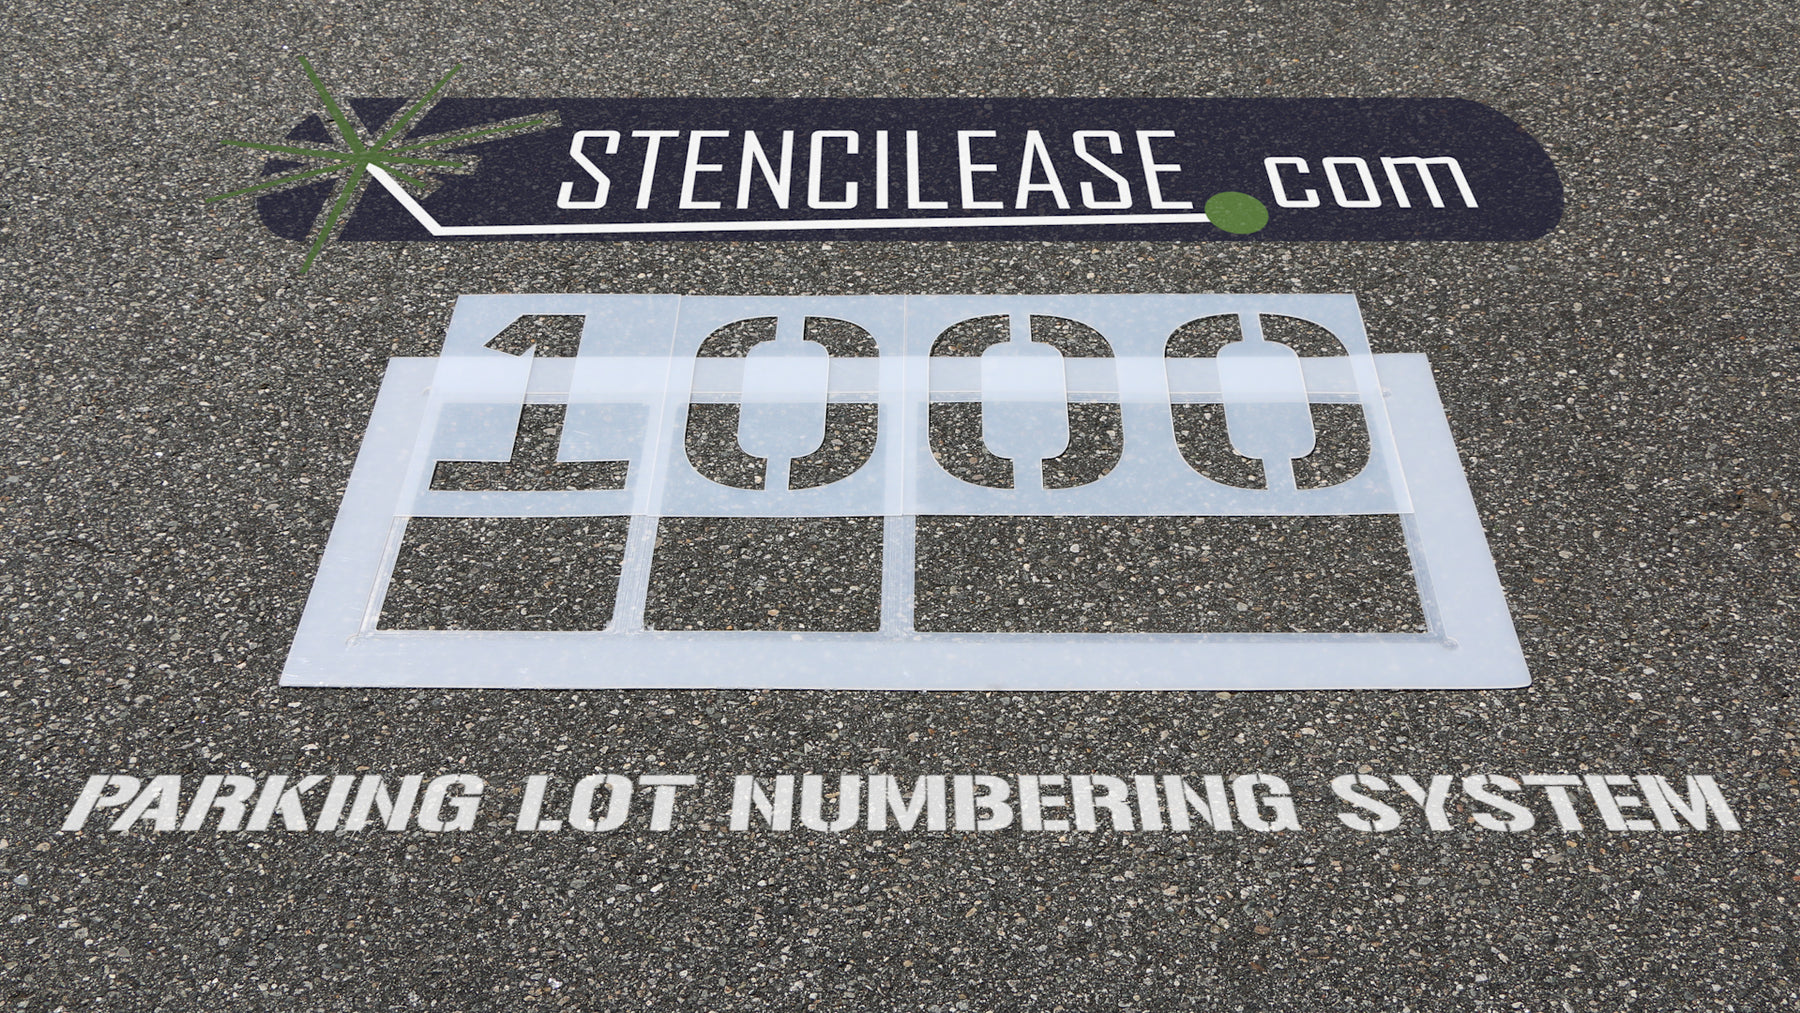 Stencil Ease Parking Lot Numbering System | How to Stencil Parking Lot Numbers